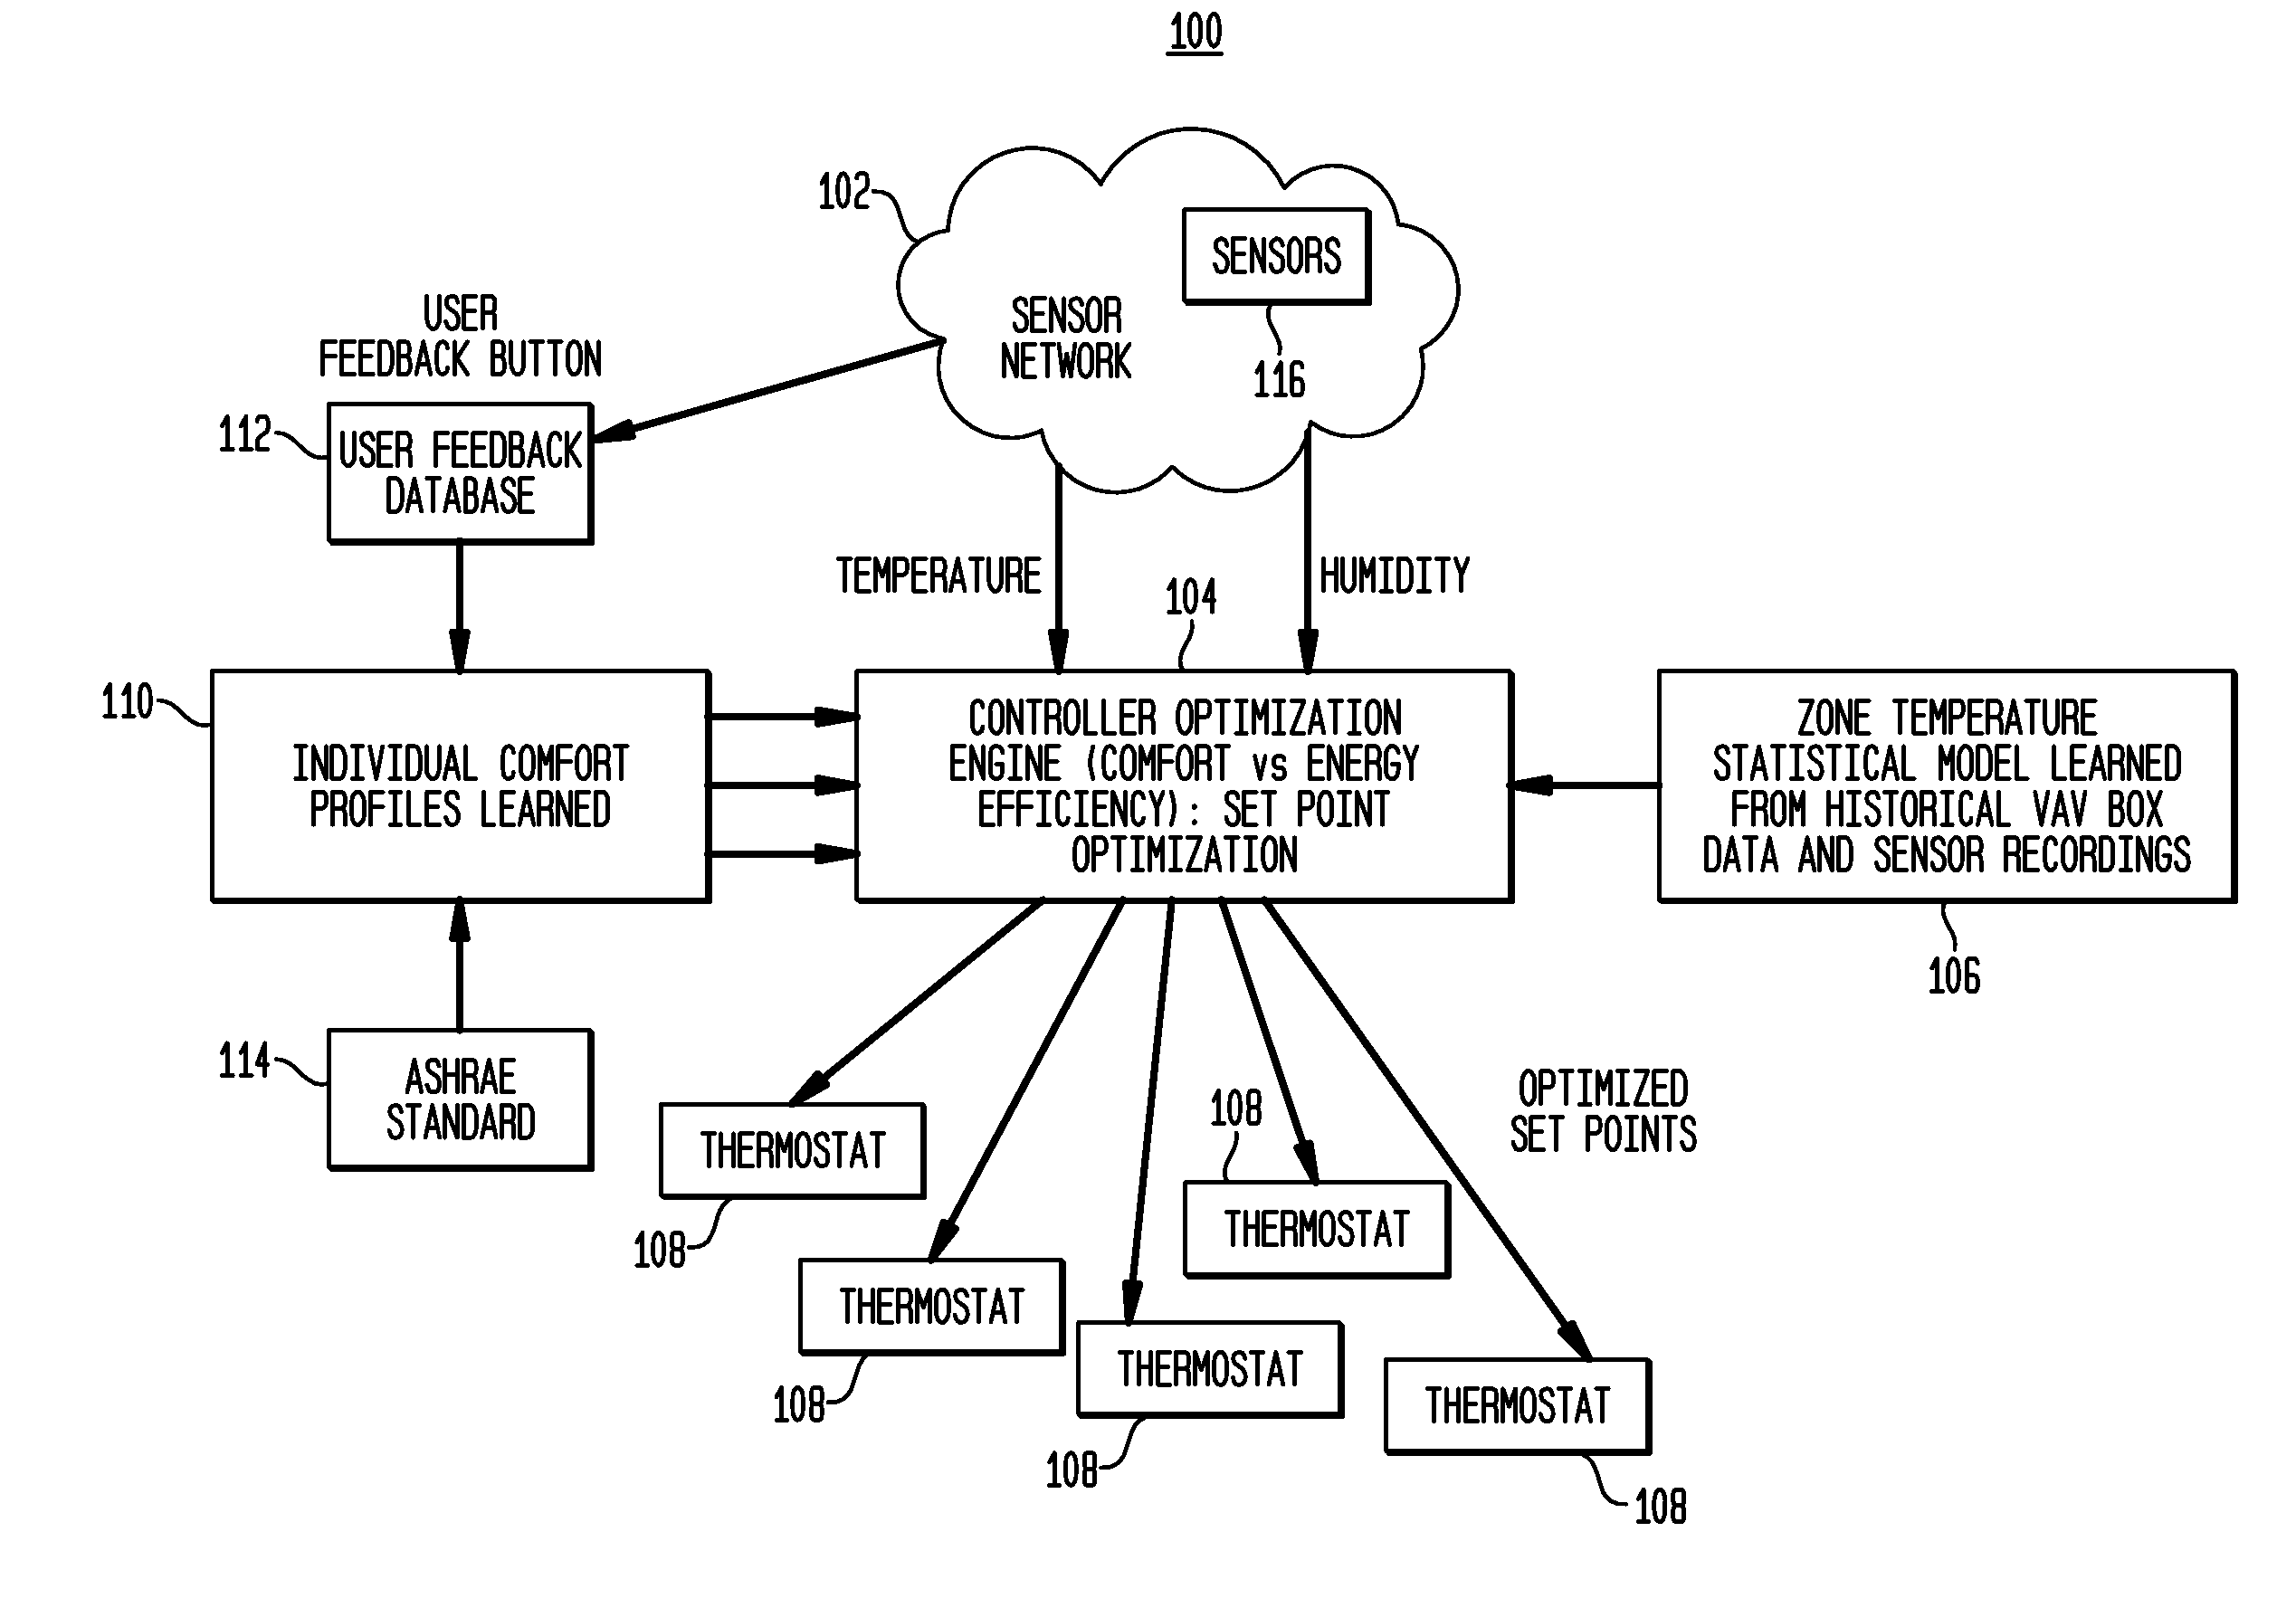 System and Method for Climate Control Set-Point Optimization Based On Individual Comfort